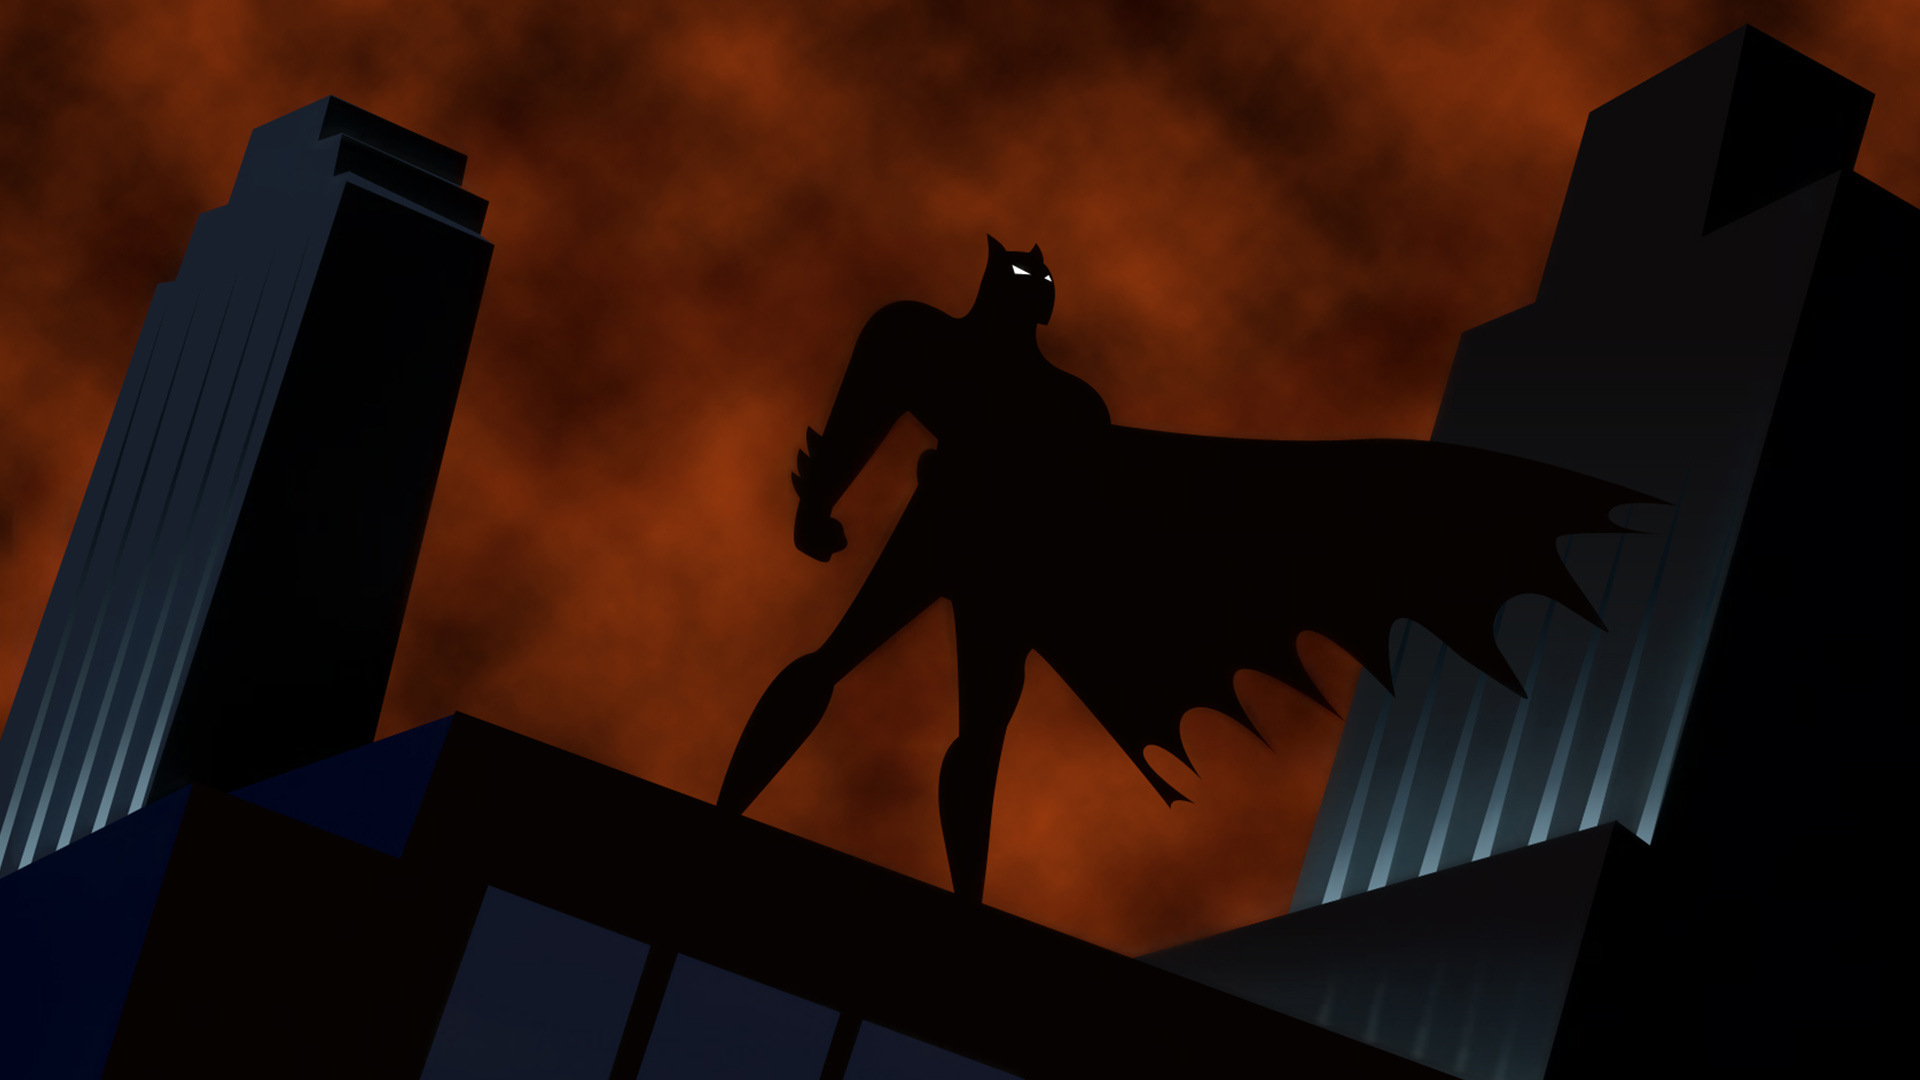 70+ Batman: The Animated Series HD Wallpapers and Backgrounds